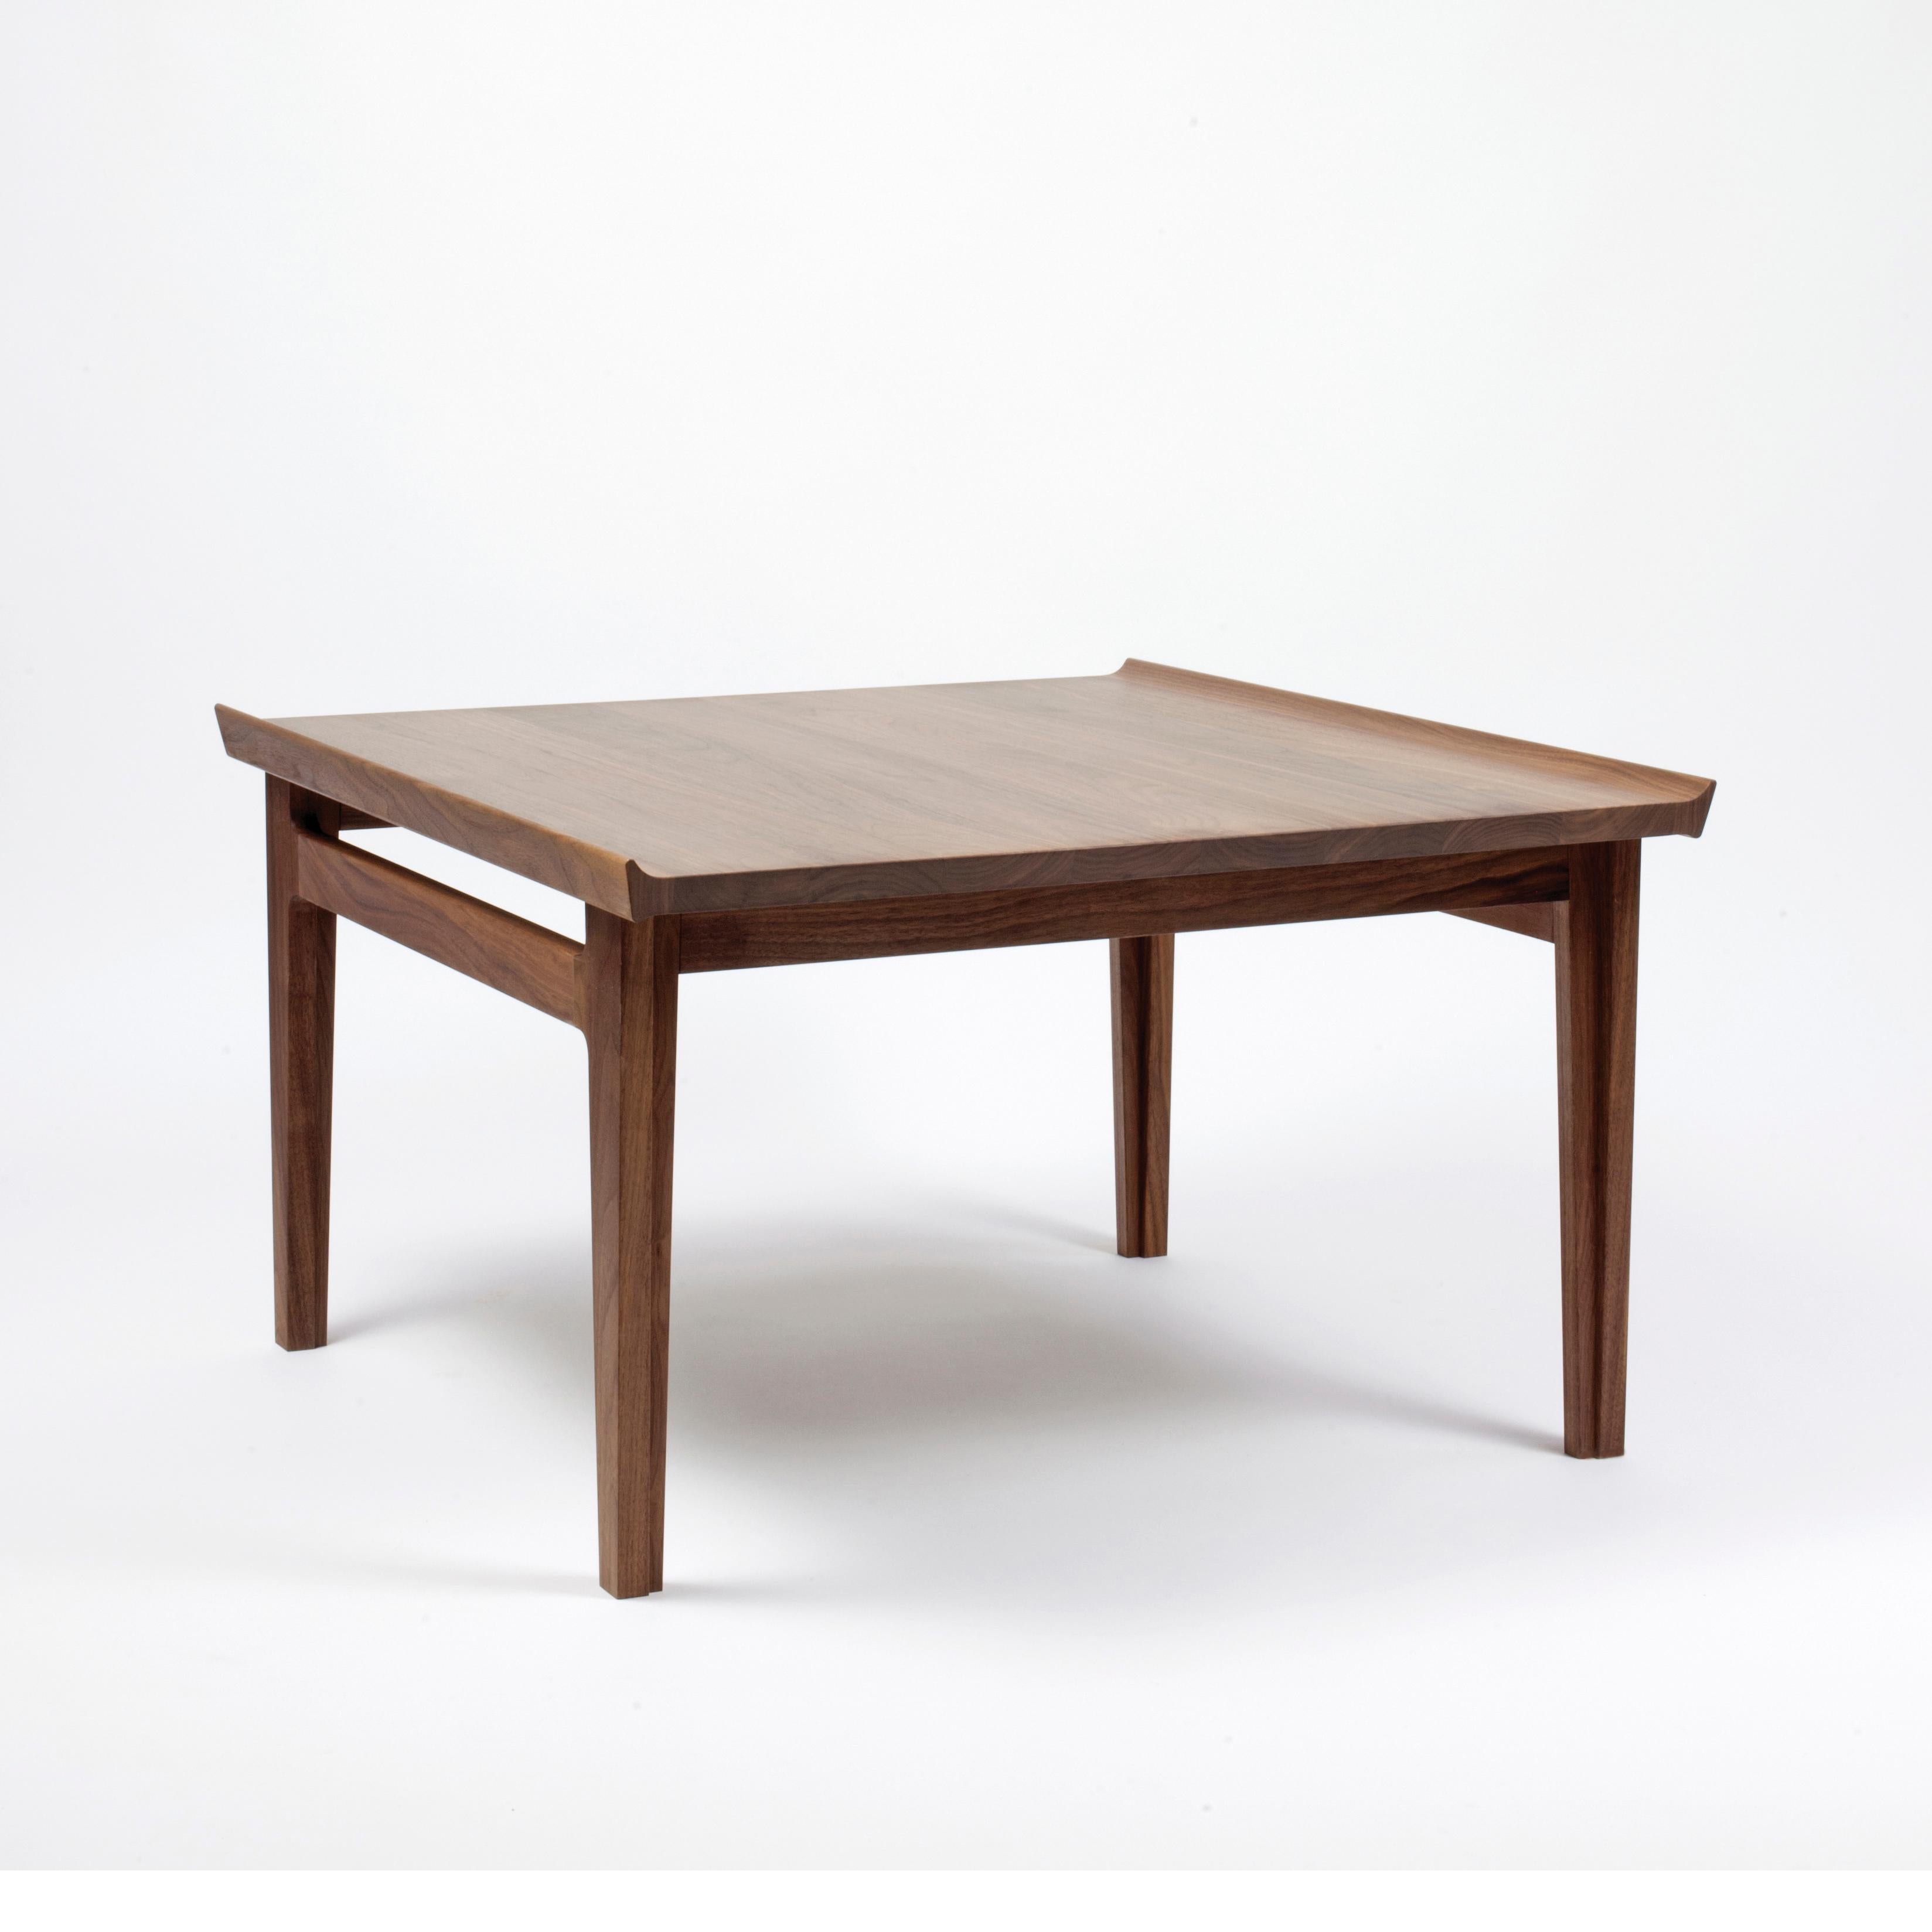 Table designed by Finn Juhl in 1958, relaunched in 2008.
Manufactured by House of Finn Juhl in Denmark.

This series of coffee tables was designed by Finn Juhl for France & Son in 1958, in similar fashion to the Japan Series. During the 50s the